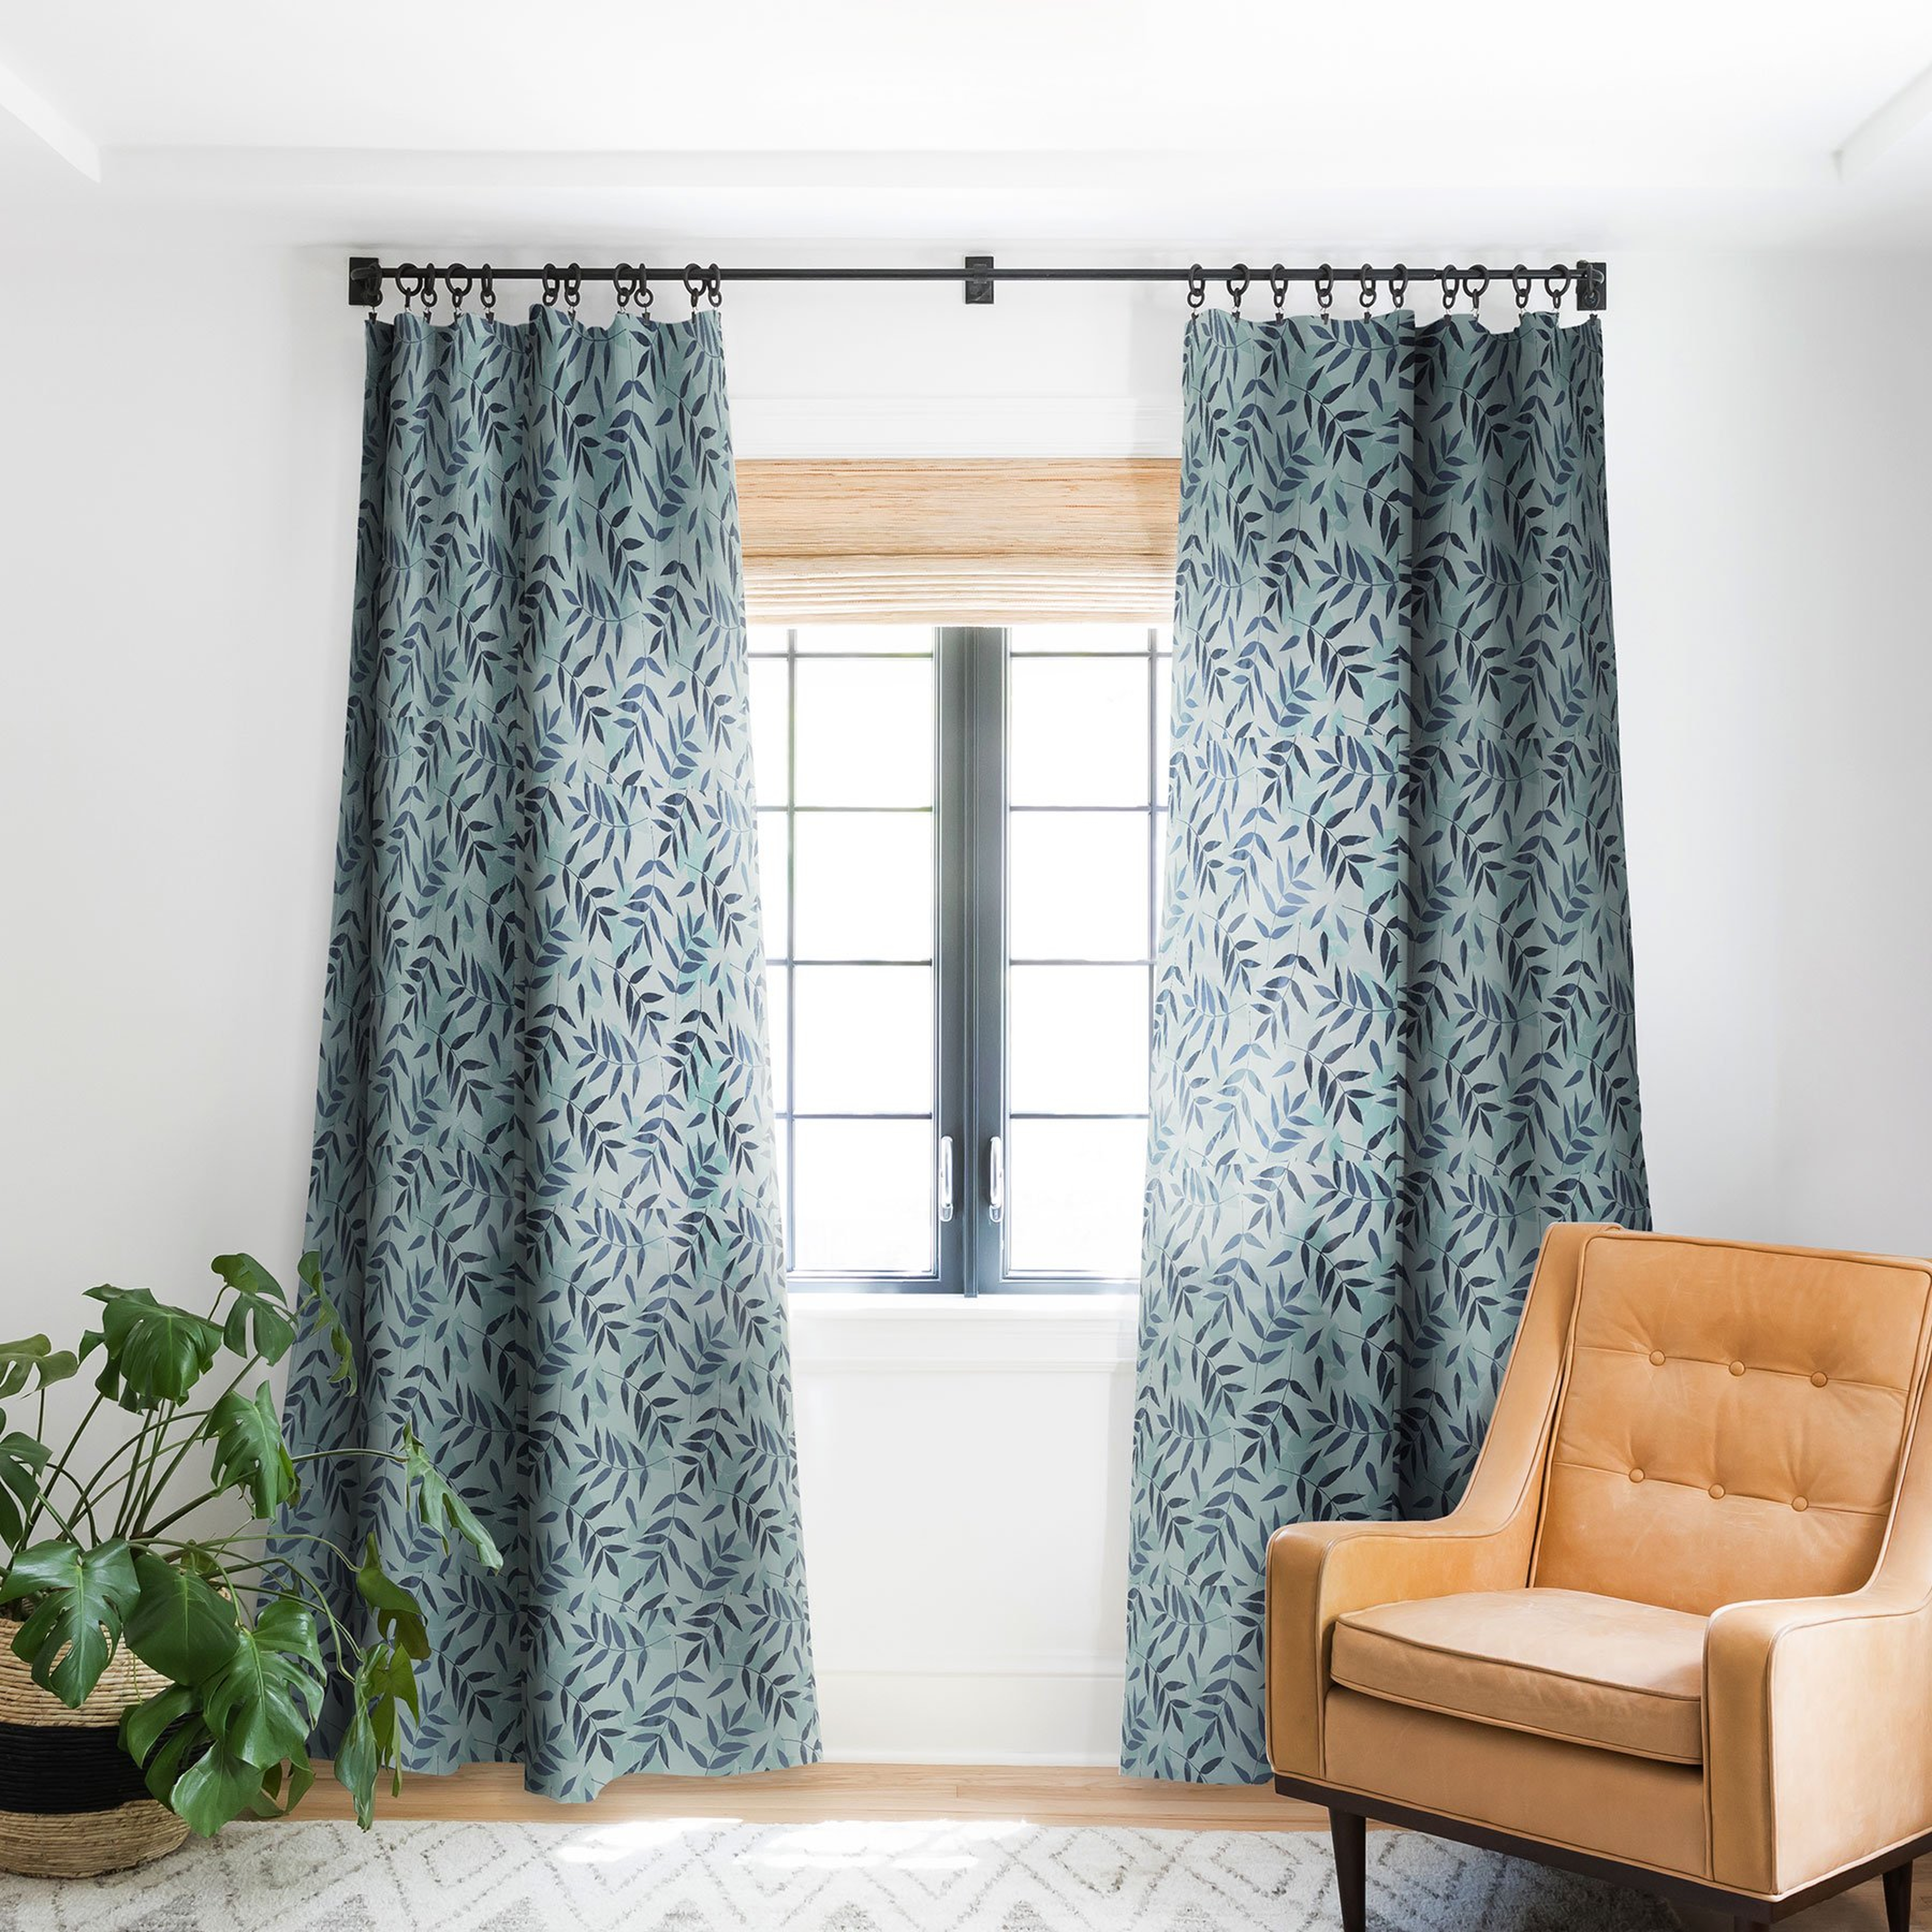 BLACKOUT WINDOW CURTAIN LEAVES SCATTERED 1  BY MAREIKE BOEHMER - Wander Print Co.